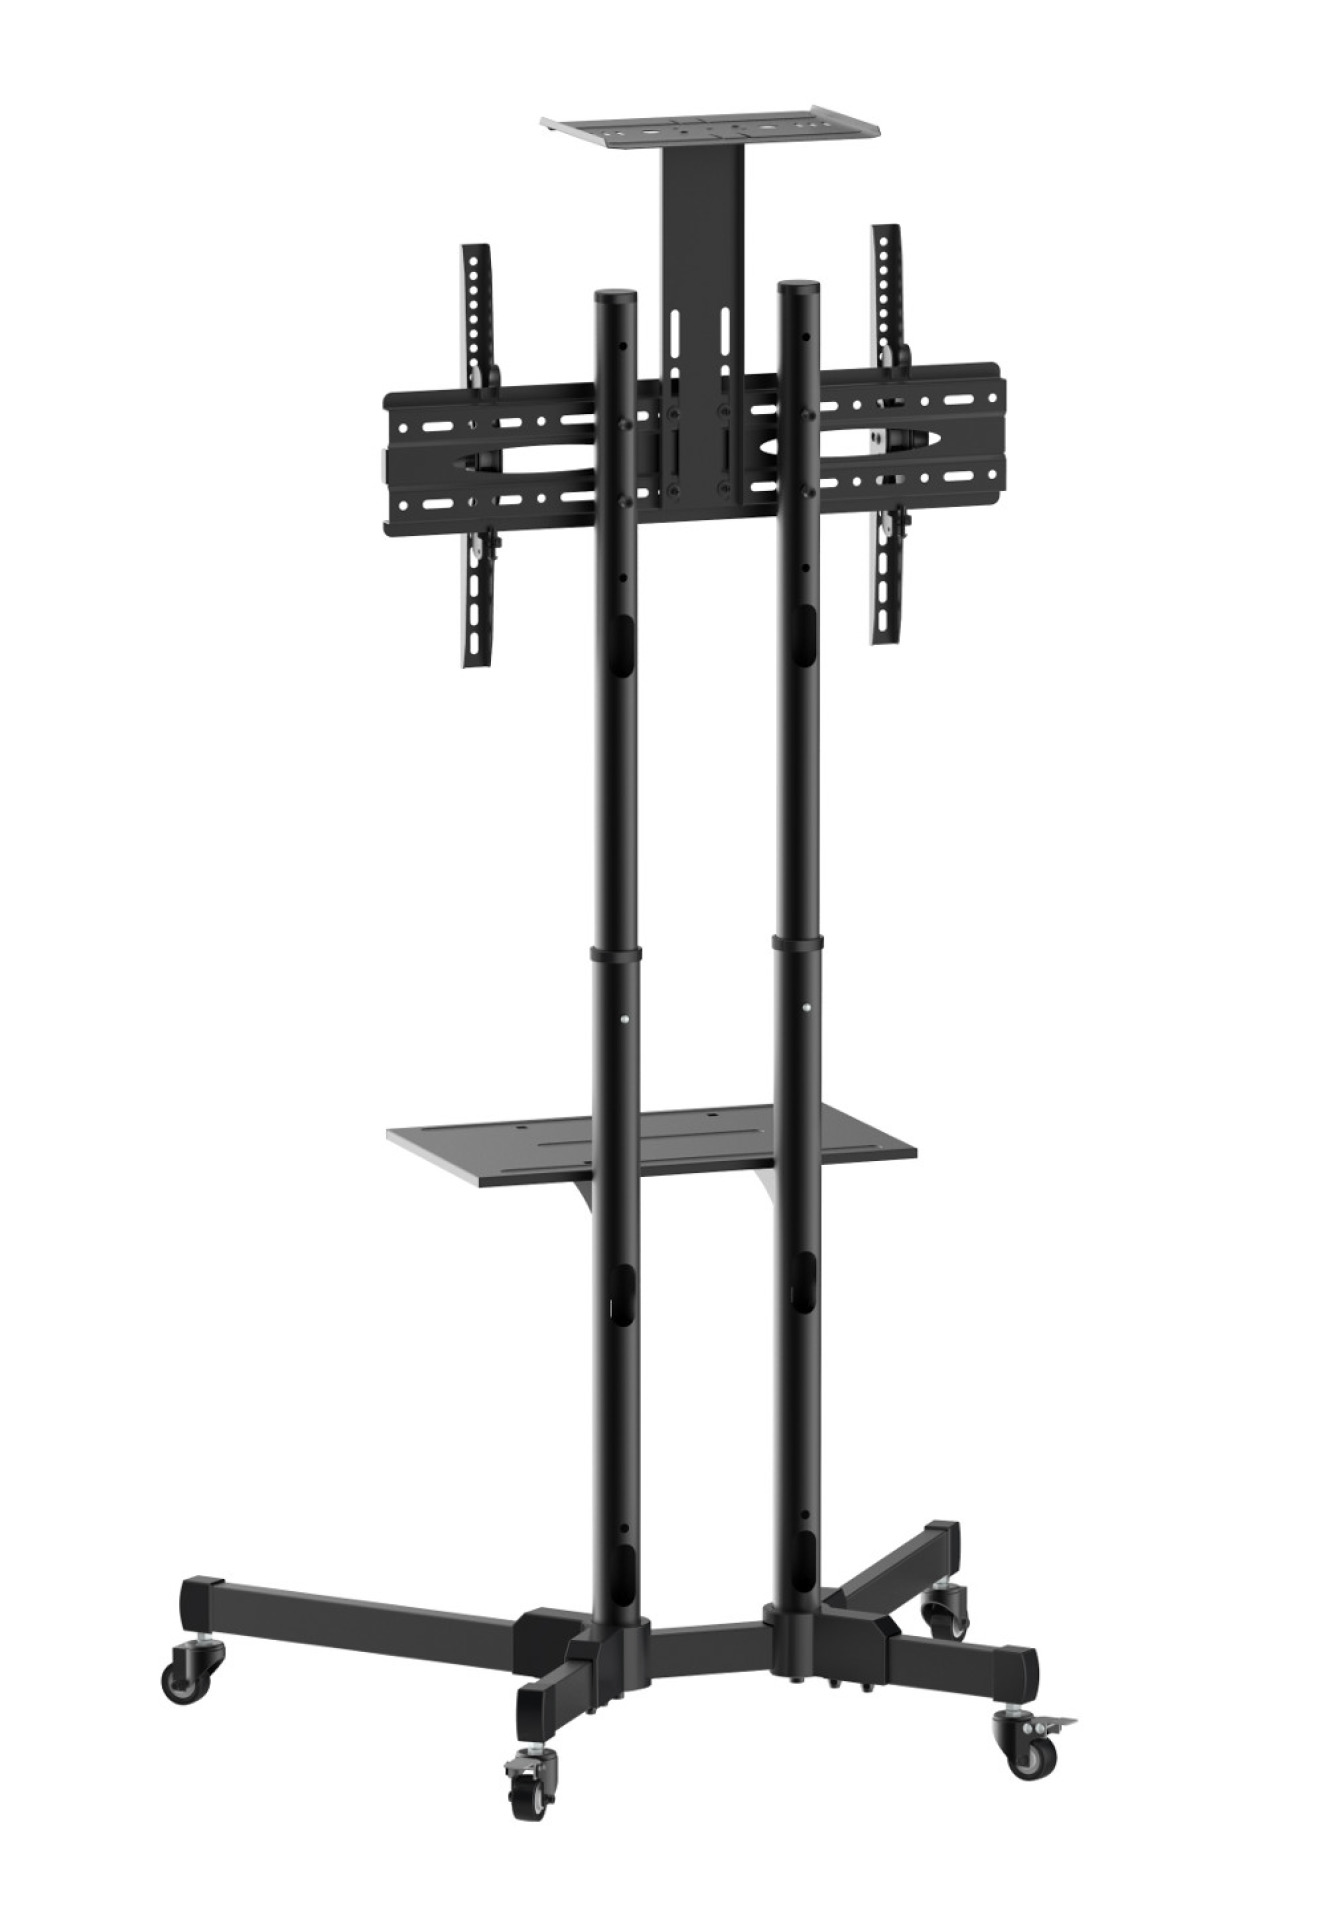 Trolley floor support for LCD LED TV 37-70", with two shelf